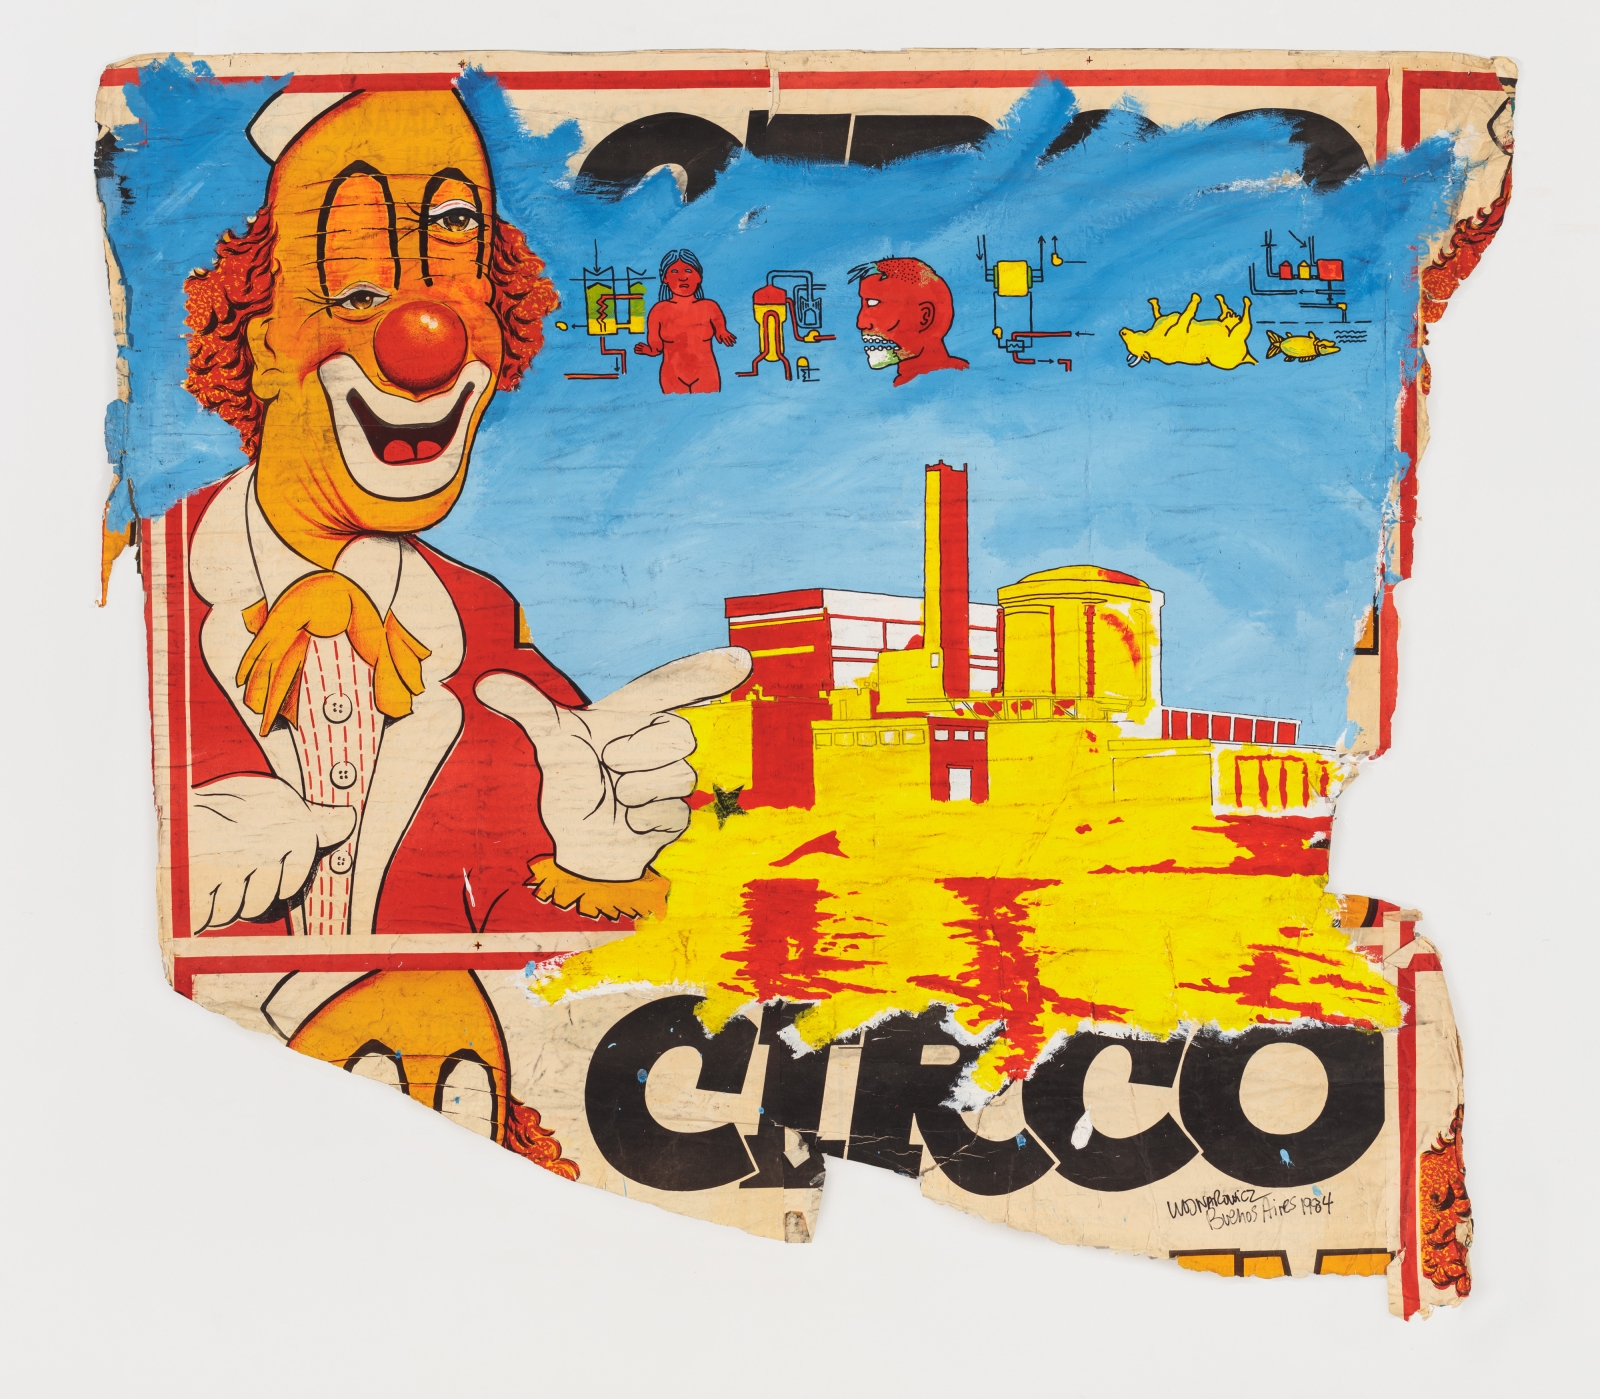 David Wojnarowicz
Circo: Cordoba Nuclear Plant, 1984
acrylic and collage on found printed poster
signed and dated
53 1/2 x 77 ins.
135.9 x 195.6 cm